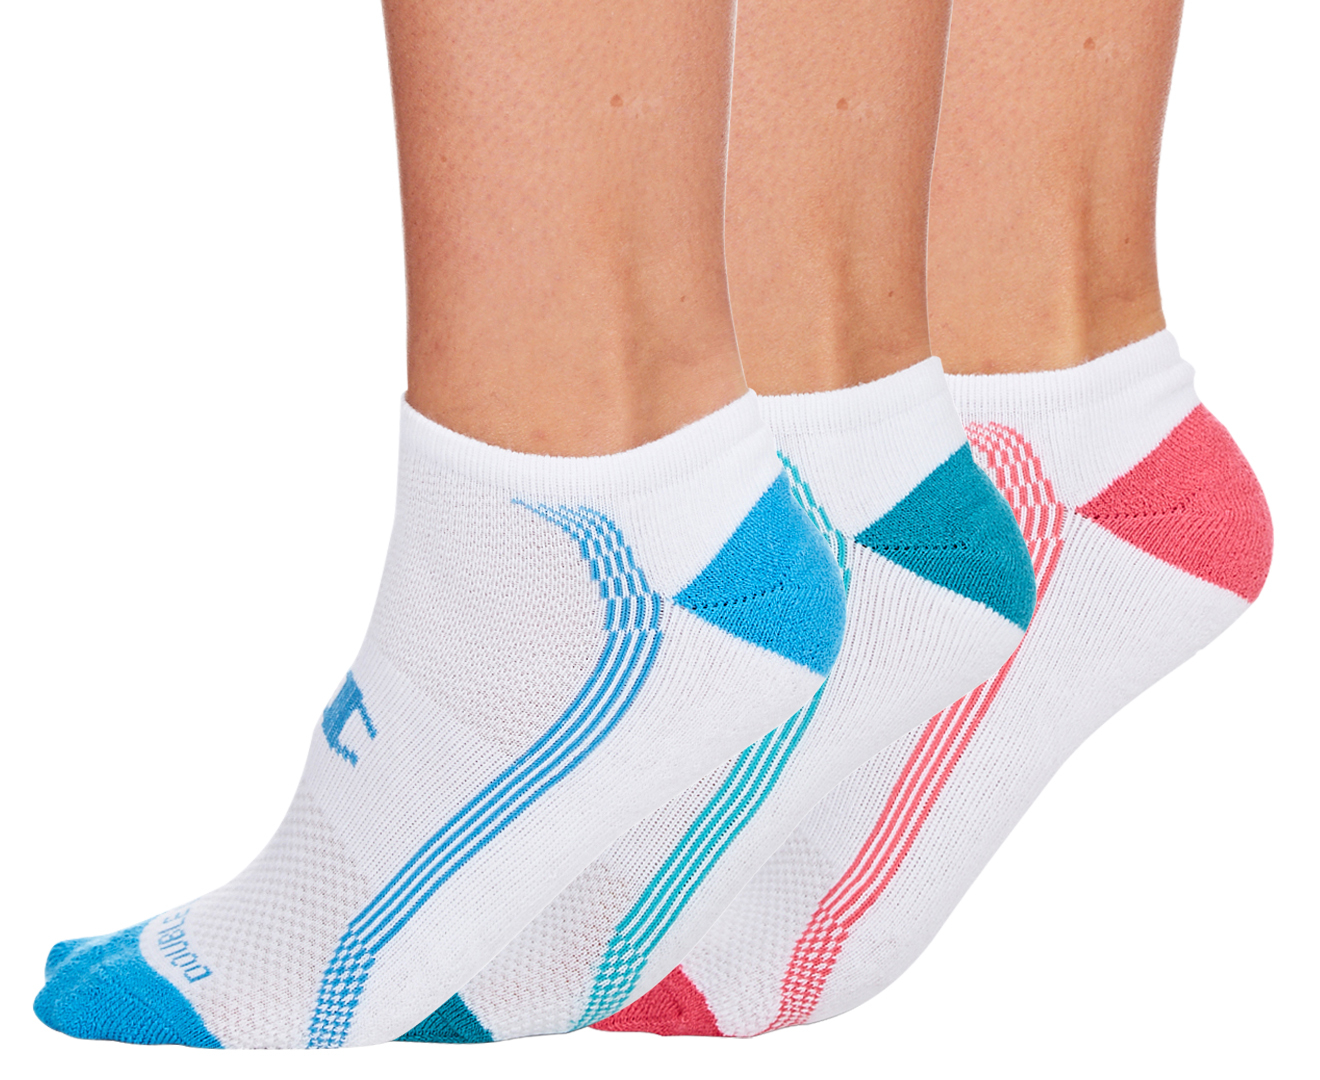 Champion Women's Size US 6-10 Low Cut Sock 3-Pack - Blue/Teal/Pink ...